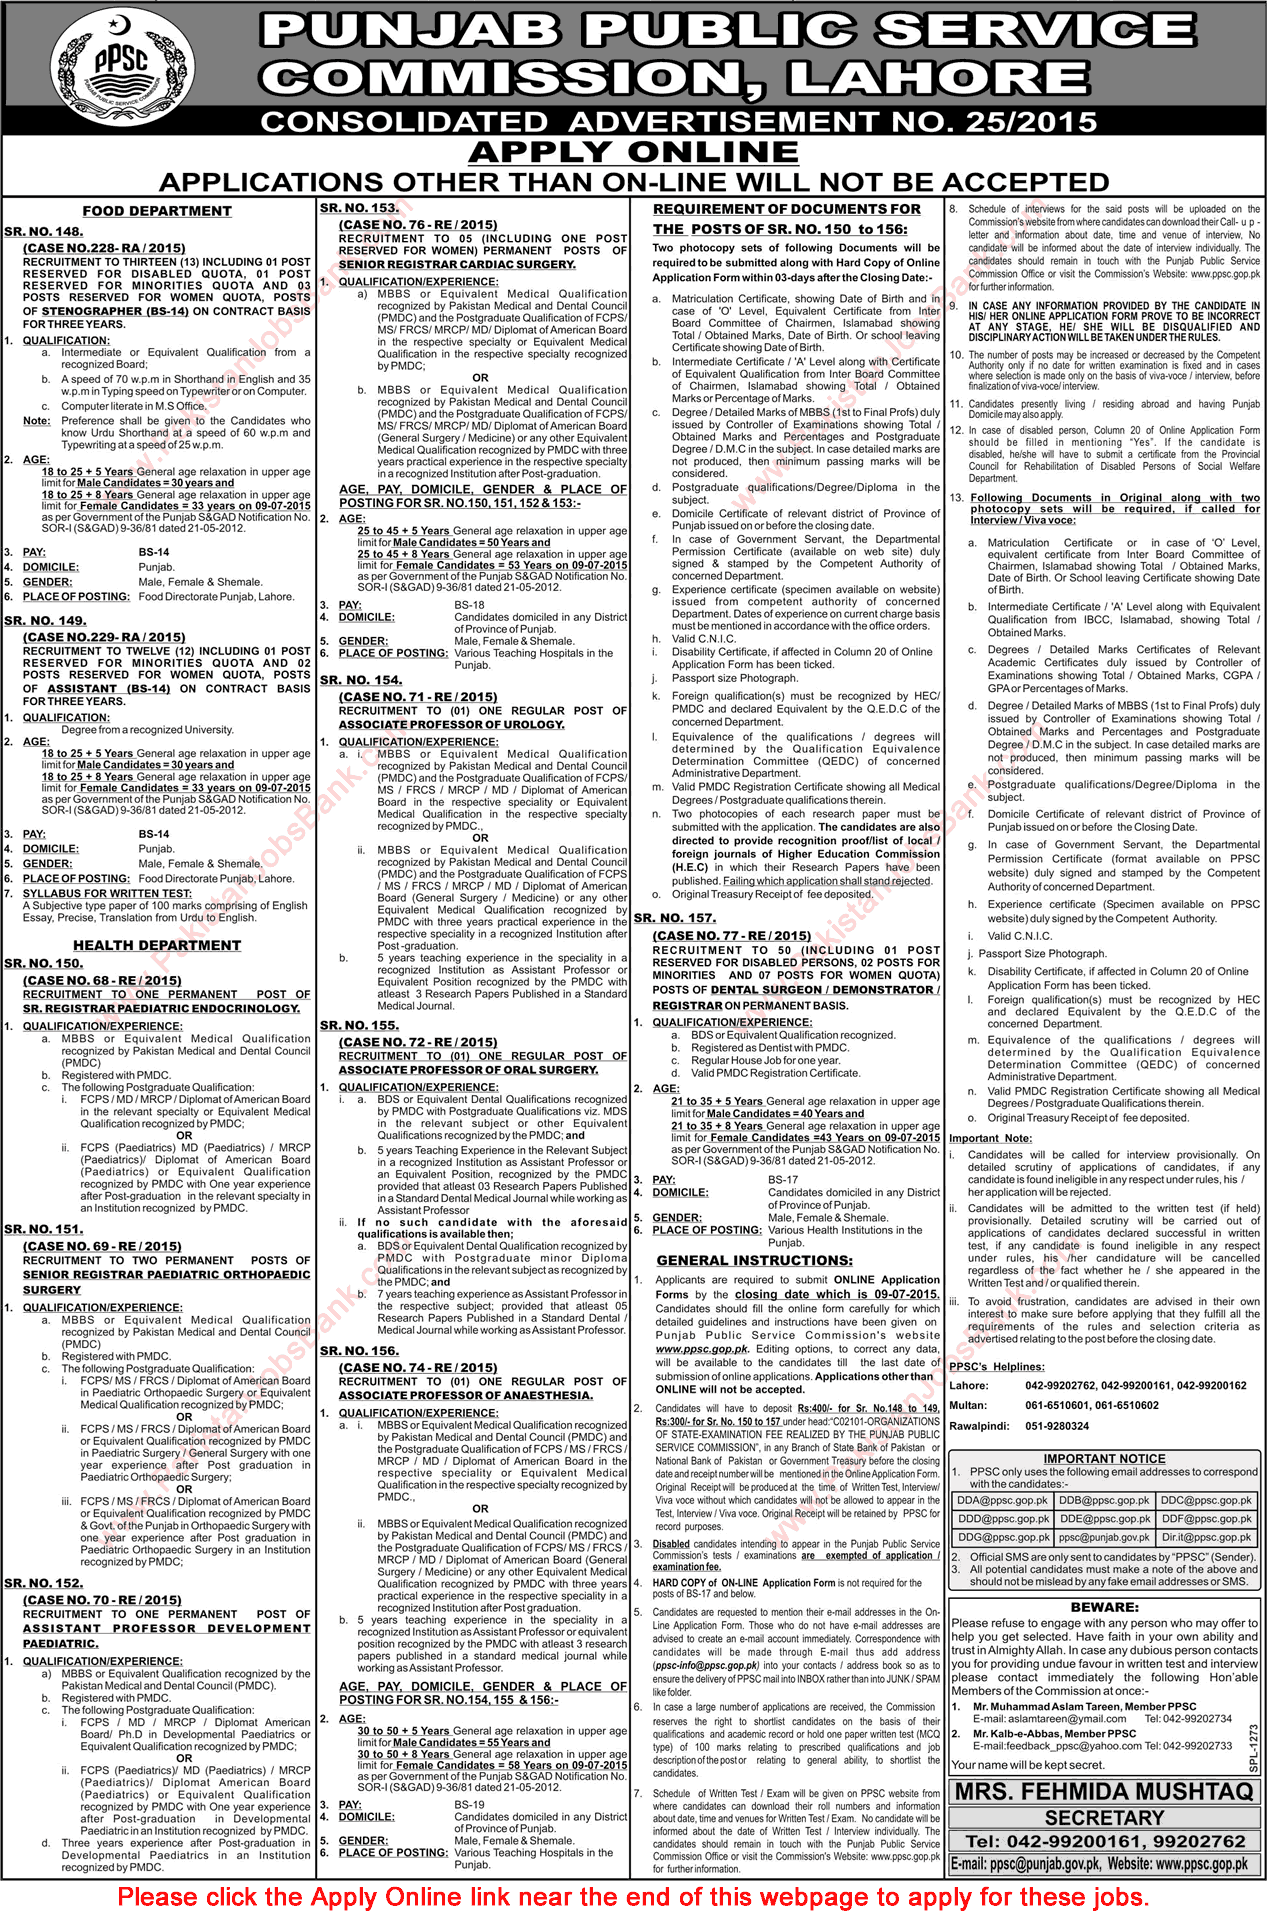 PPSC Jobs June 2015 Consolidated Advertisement No 25/2015 Apply Online Latest